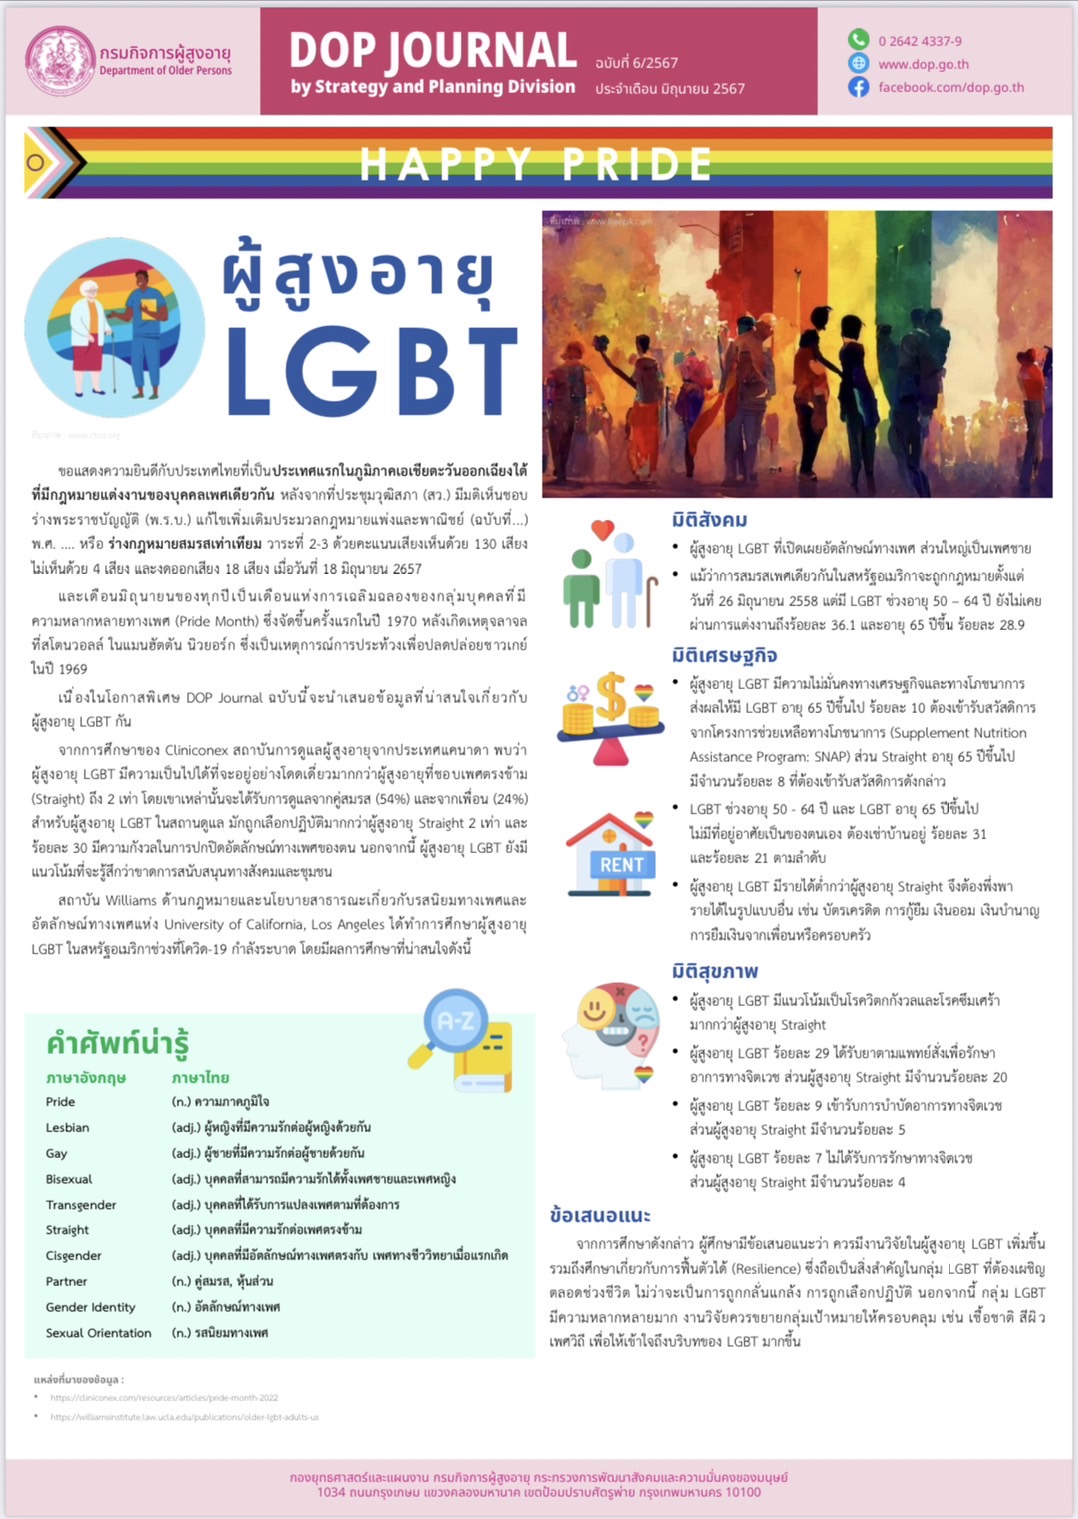 DOP JOURNAL by Strategy and Planning Division ฉบับที่ 6/2567  HAPPY PRIDE ผู้สูงอายุ LGBT